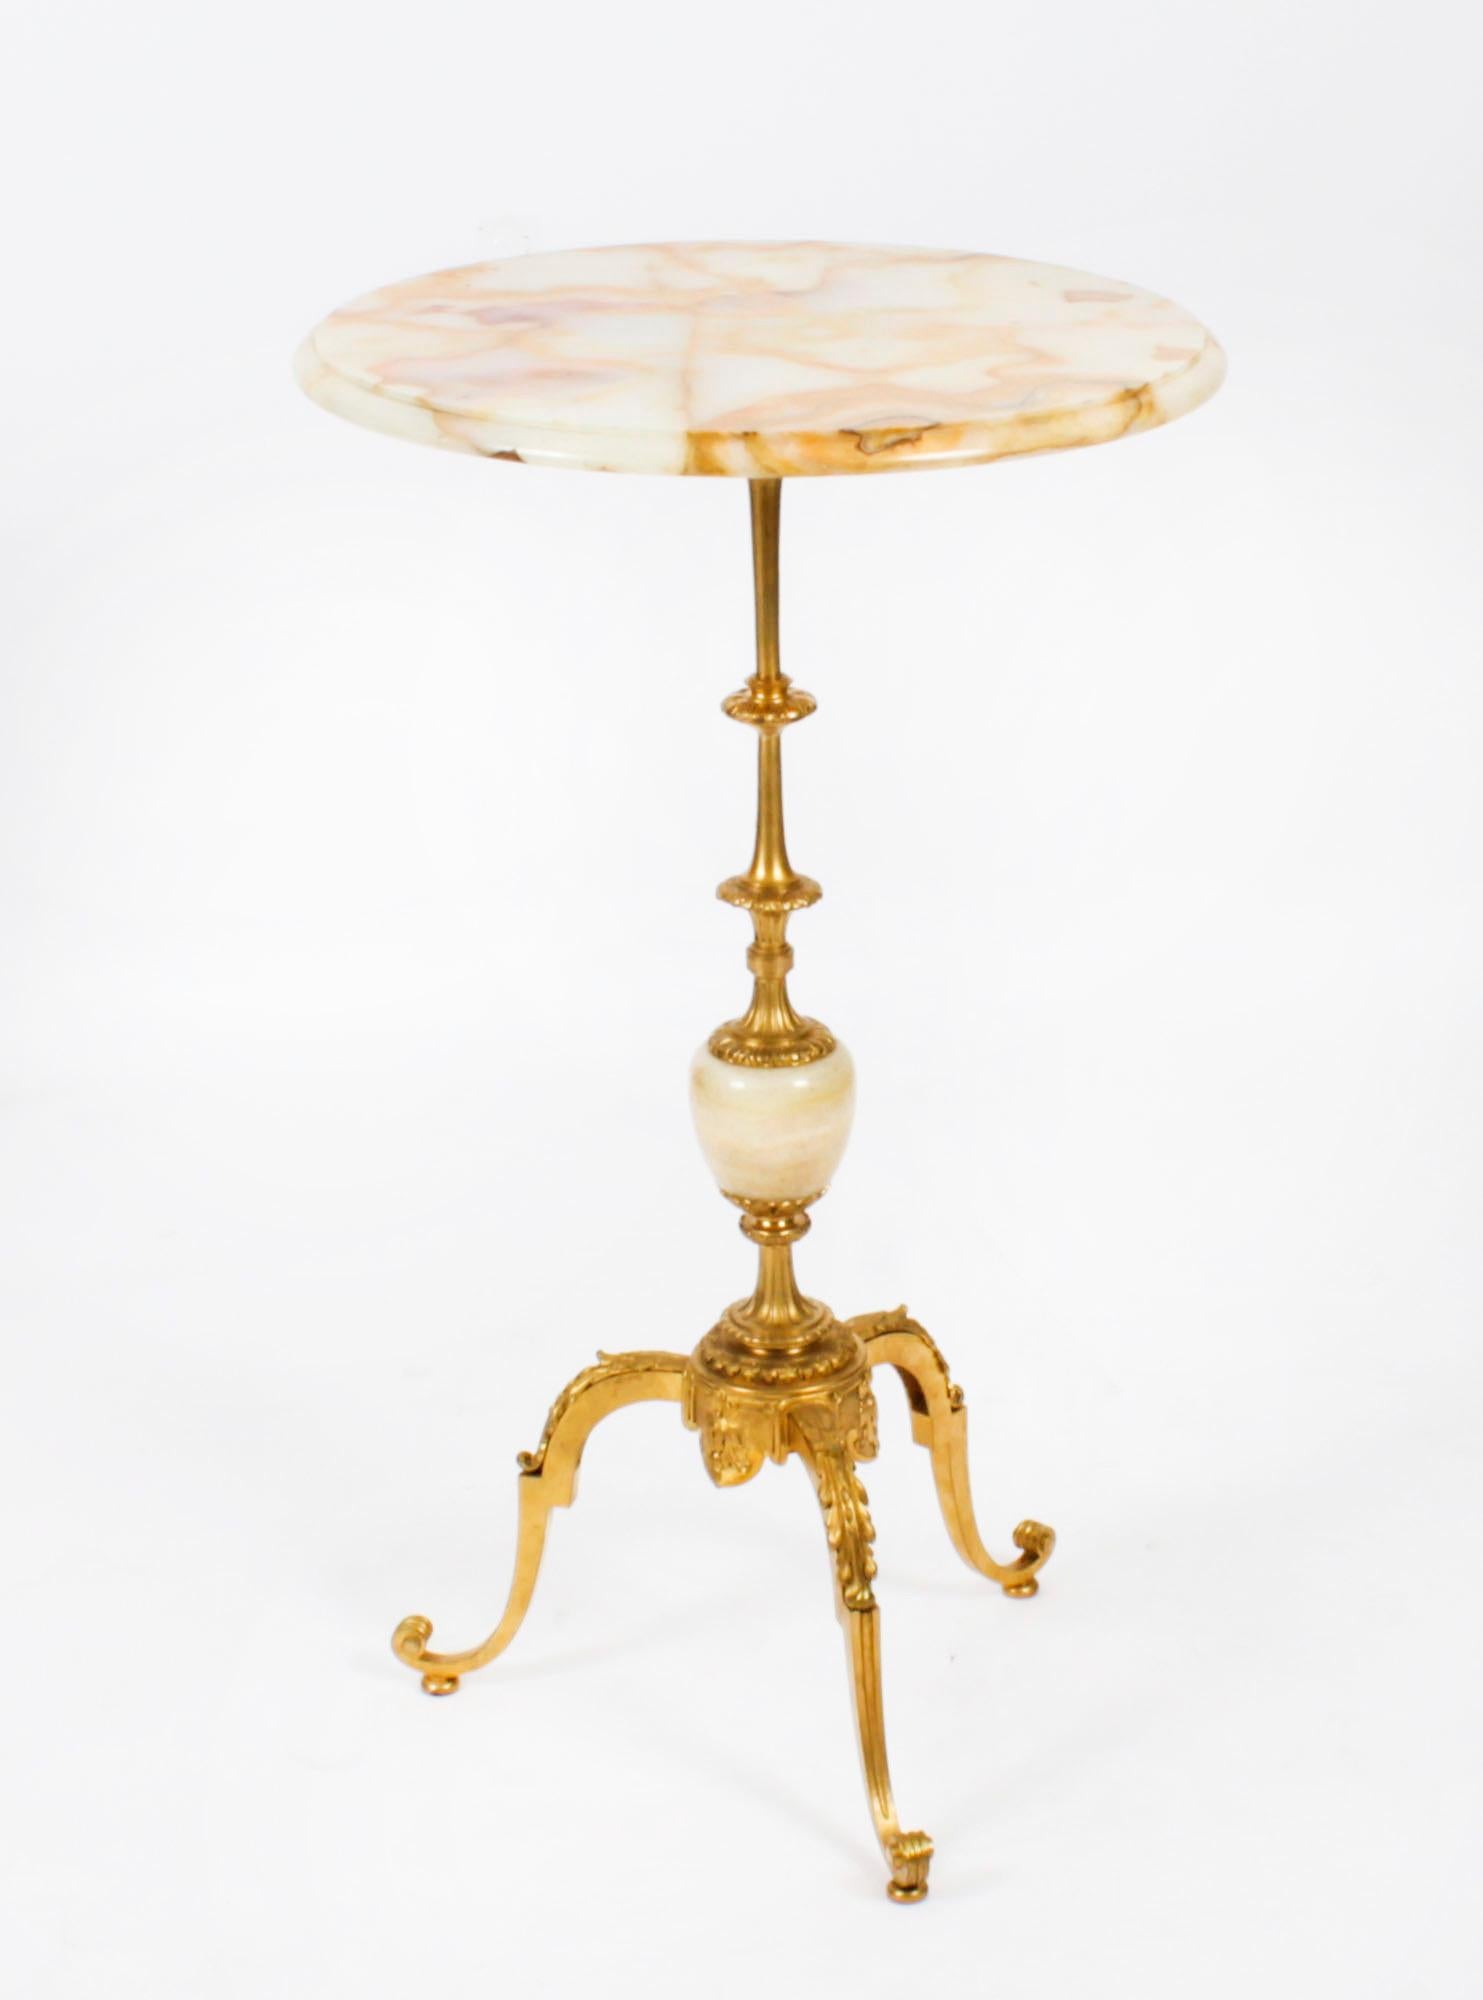 Antique French Ormolu Onyx Topped Occasional Table 19th Century For Sale 9